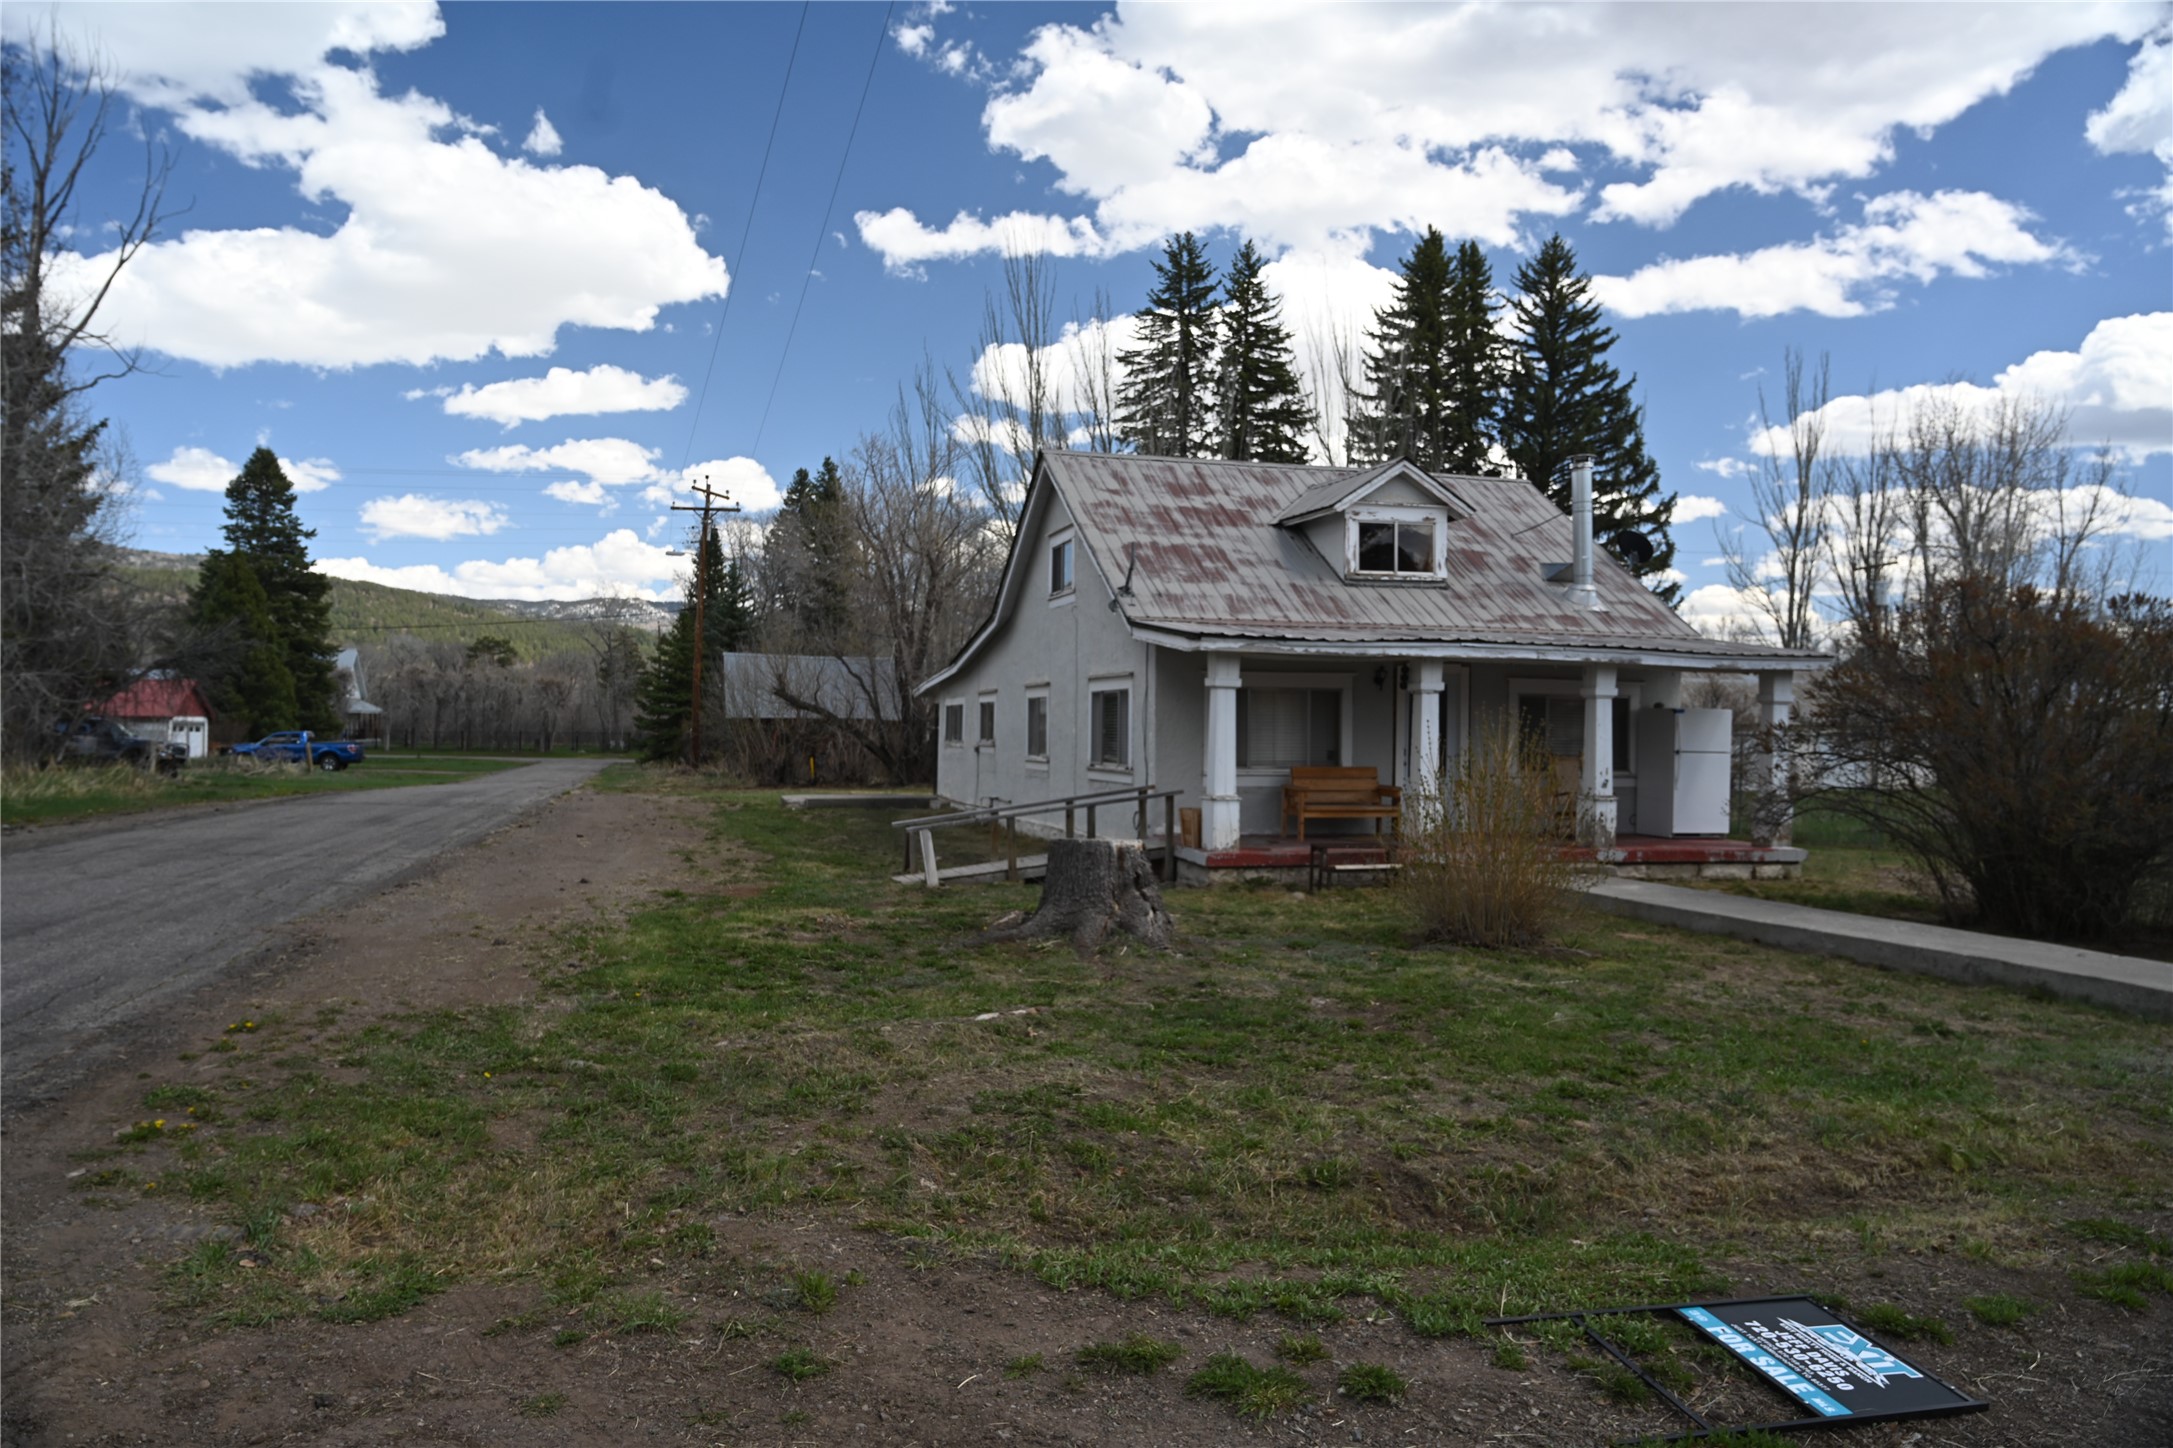 202 Pine Ave, Chama, New Mexico 87520, 3 Bedrooms Bedrooms, ,2 BathroomsBathrooms,Residential,For Sale,202 Pine Ave,202401499